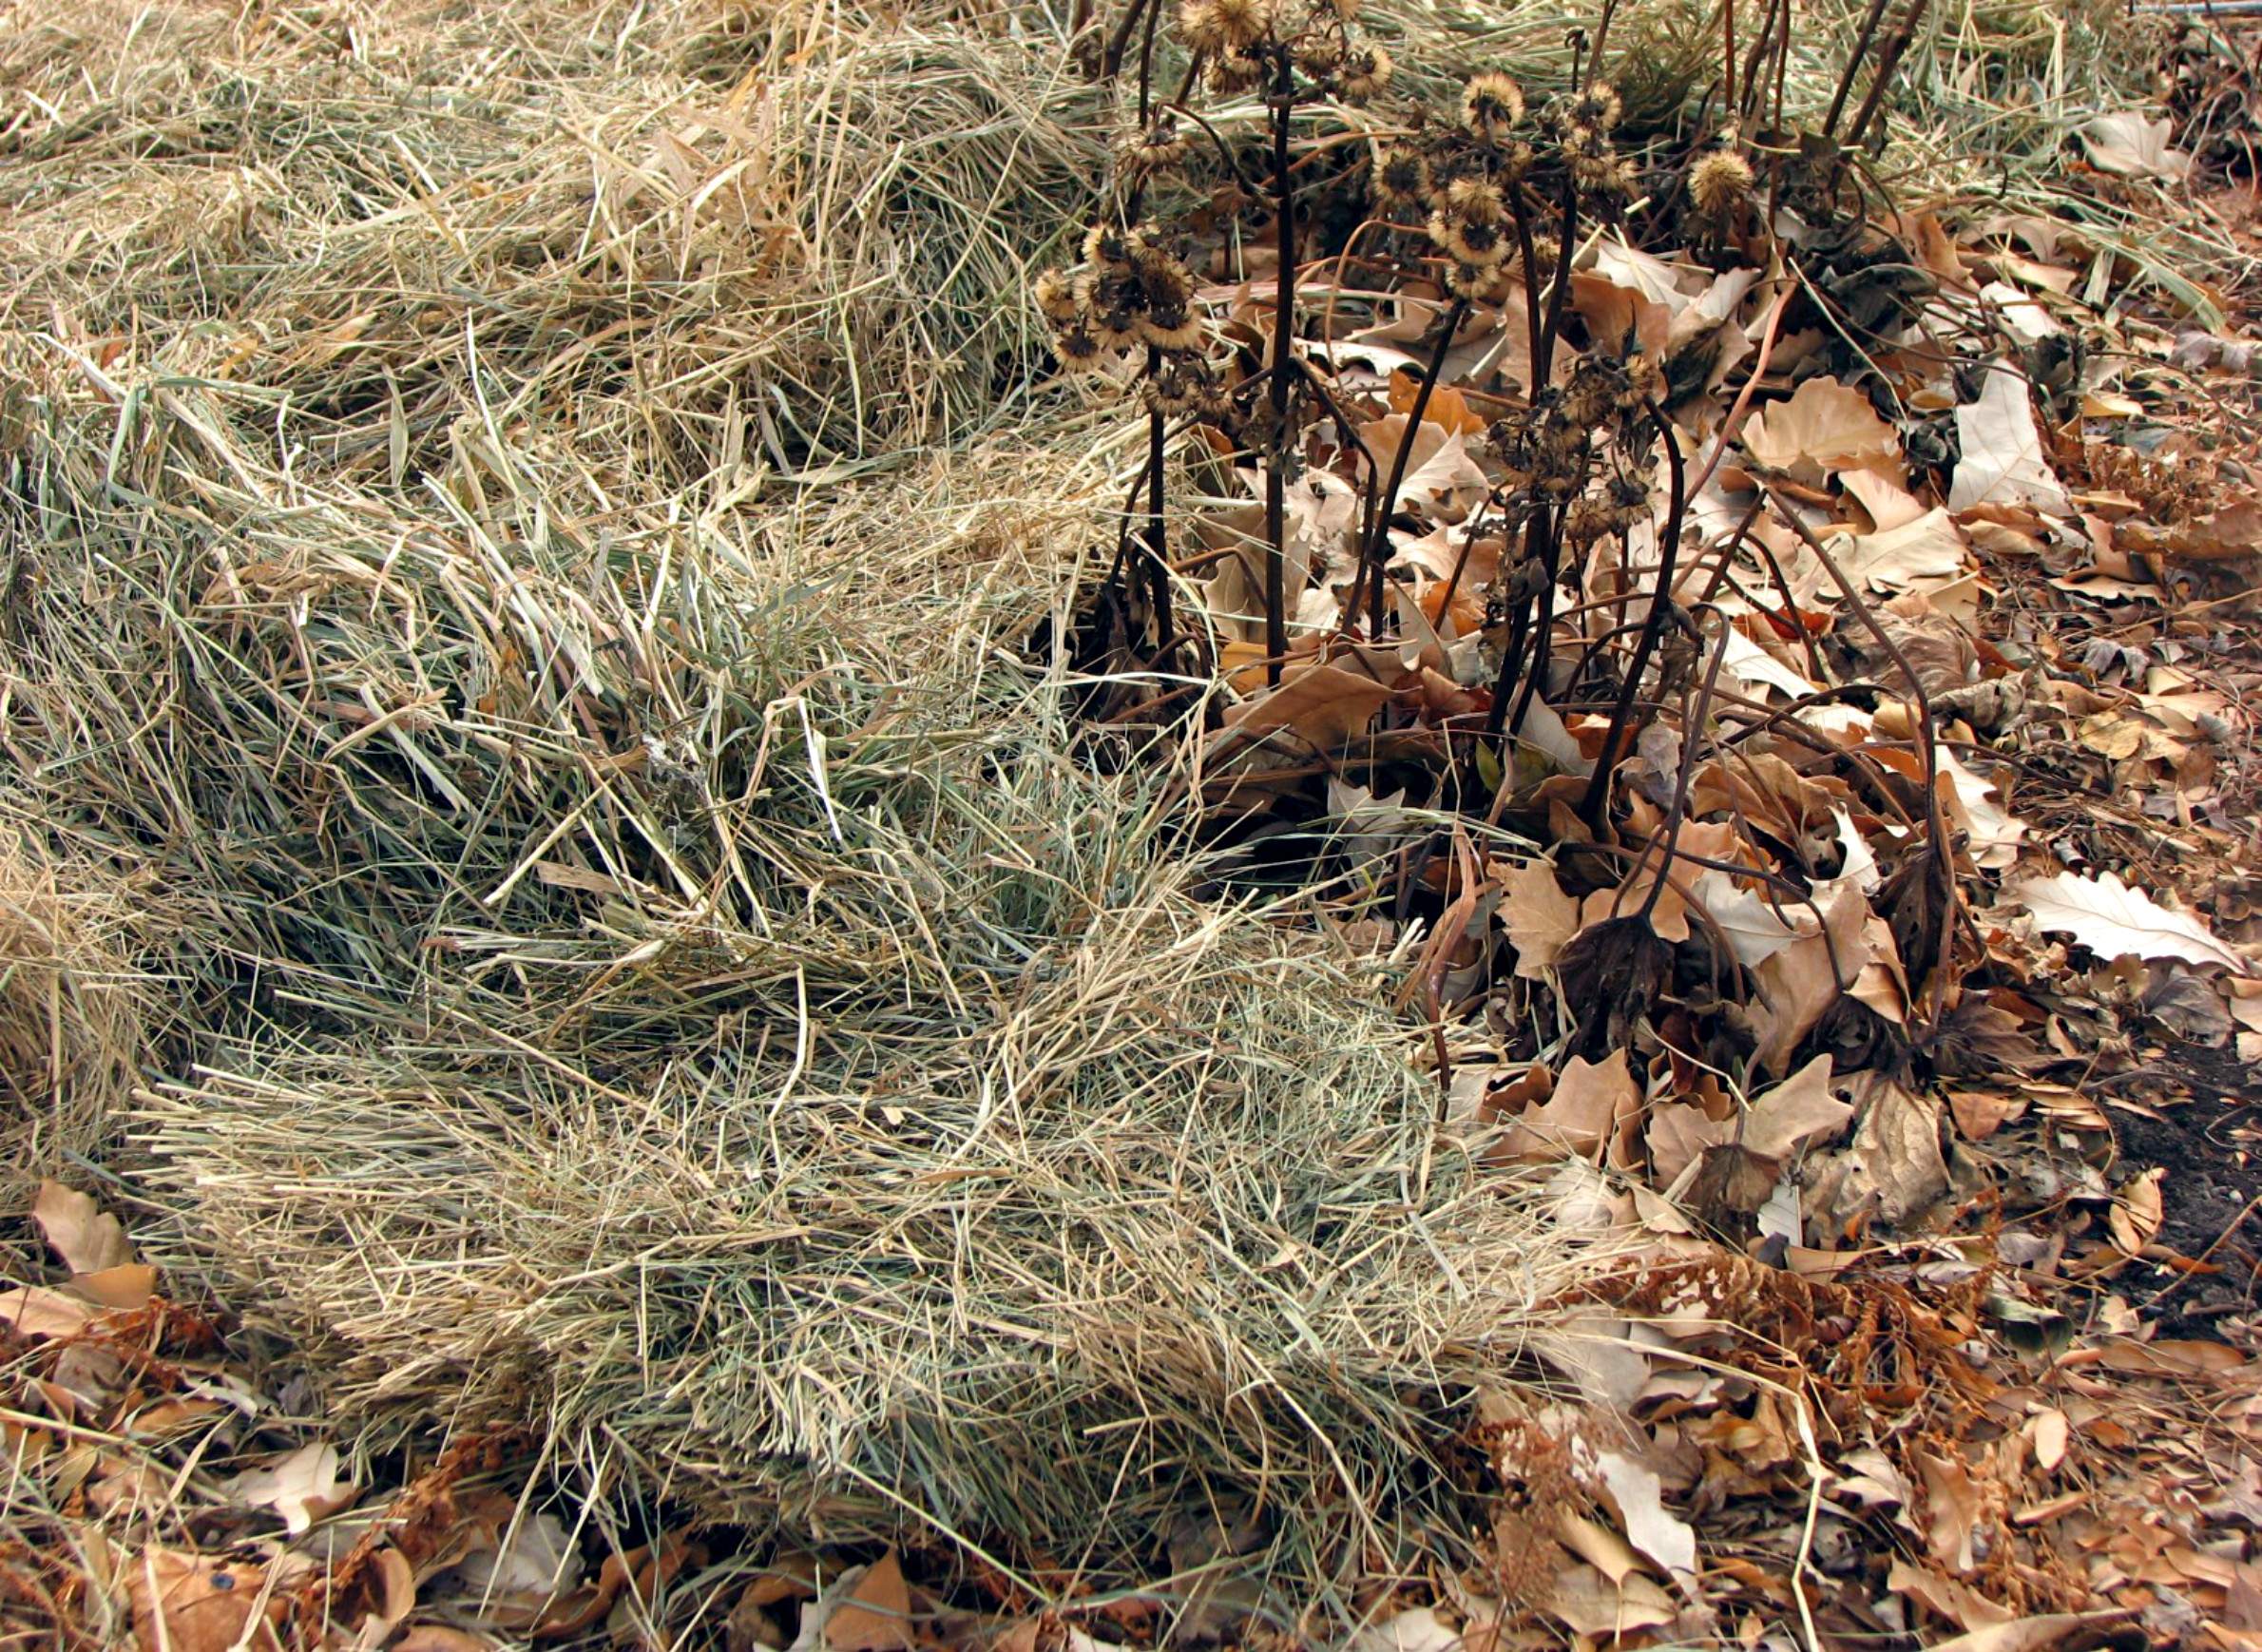 https://wiscontext.org/sites/default/files/styles/article_full_size_image/public/assets/images/gardening-winter-soil-mulching.jpg?itok=HZ67iiy7